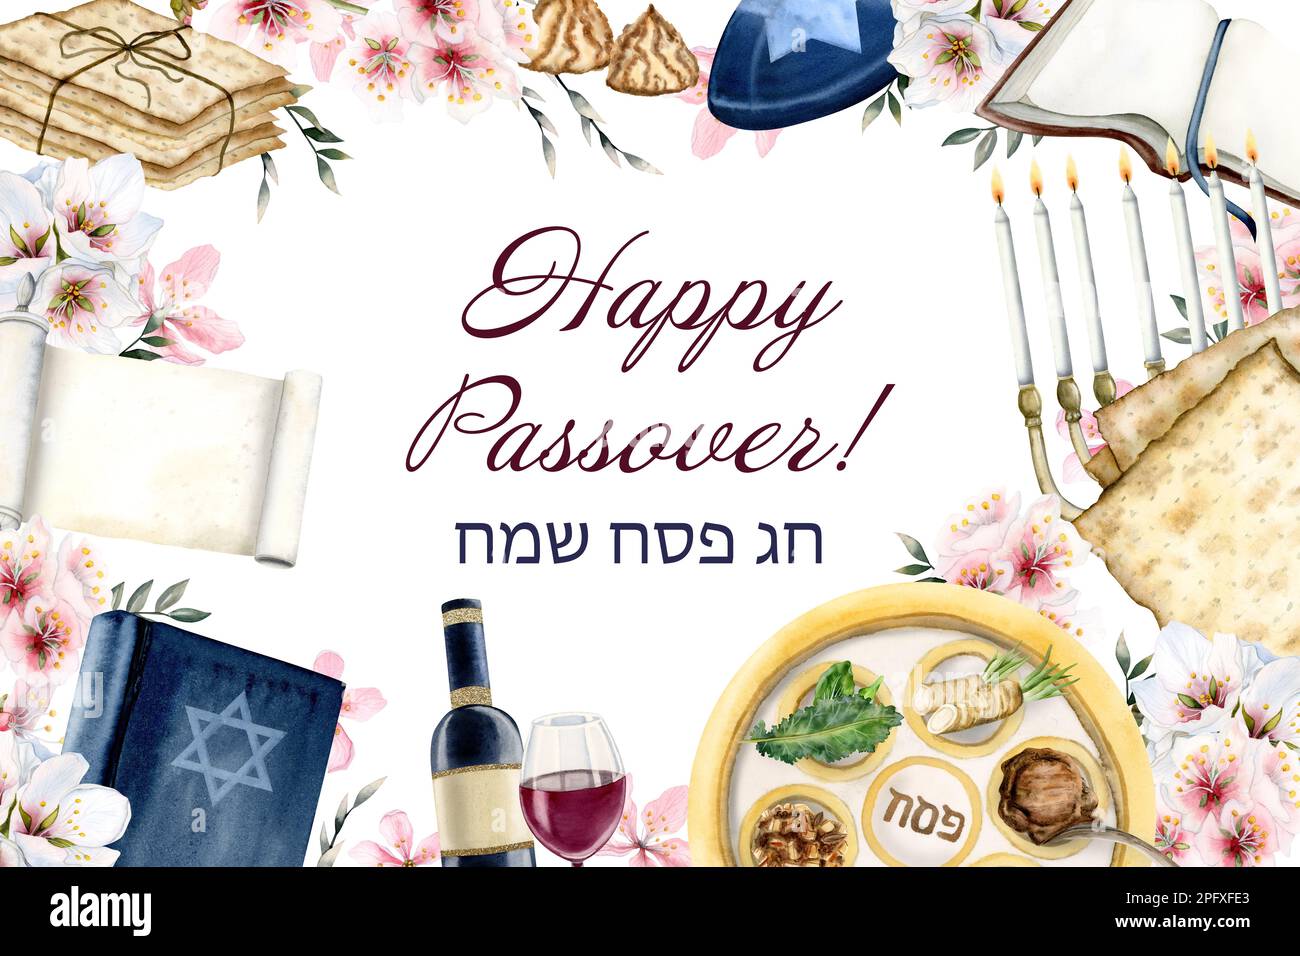 Happy Passover banner with Hebrew greetings, Pesah seder plate, matzah and almond flowers - Chag Sameach Jewish holiday card Stock Photo